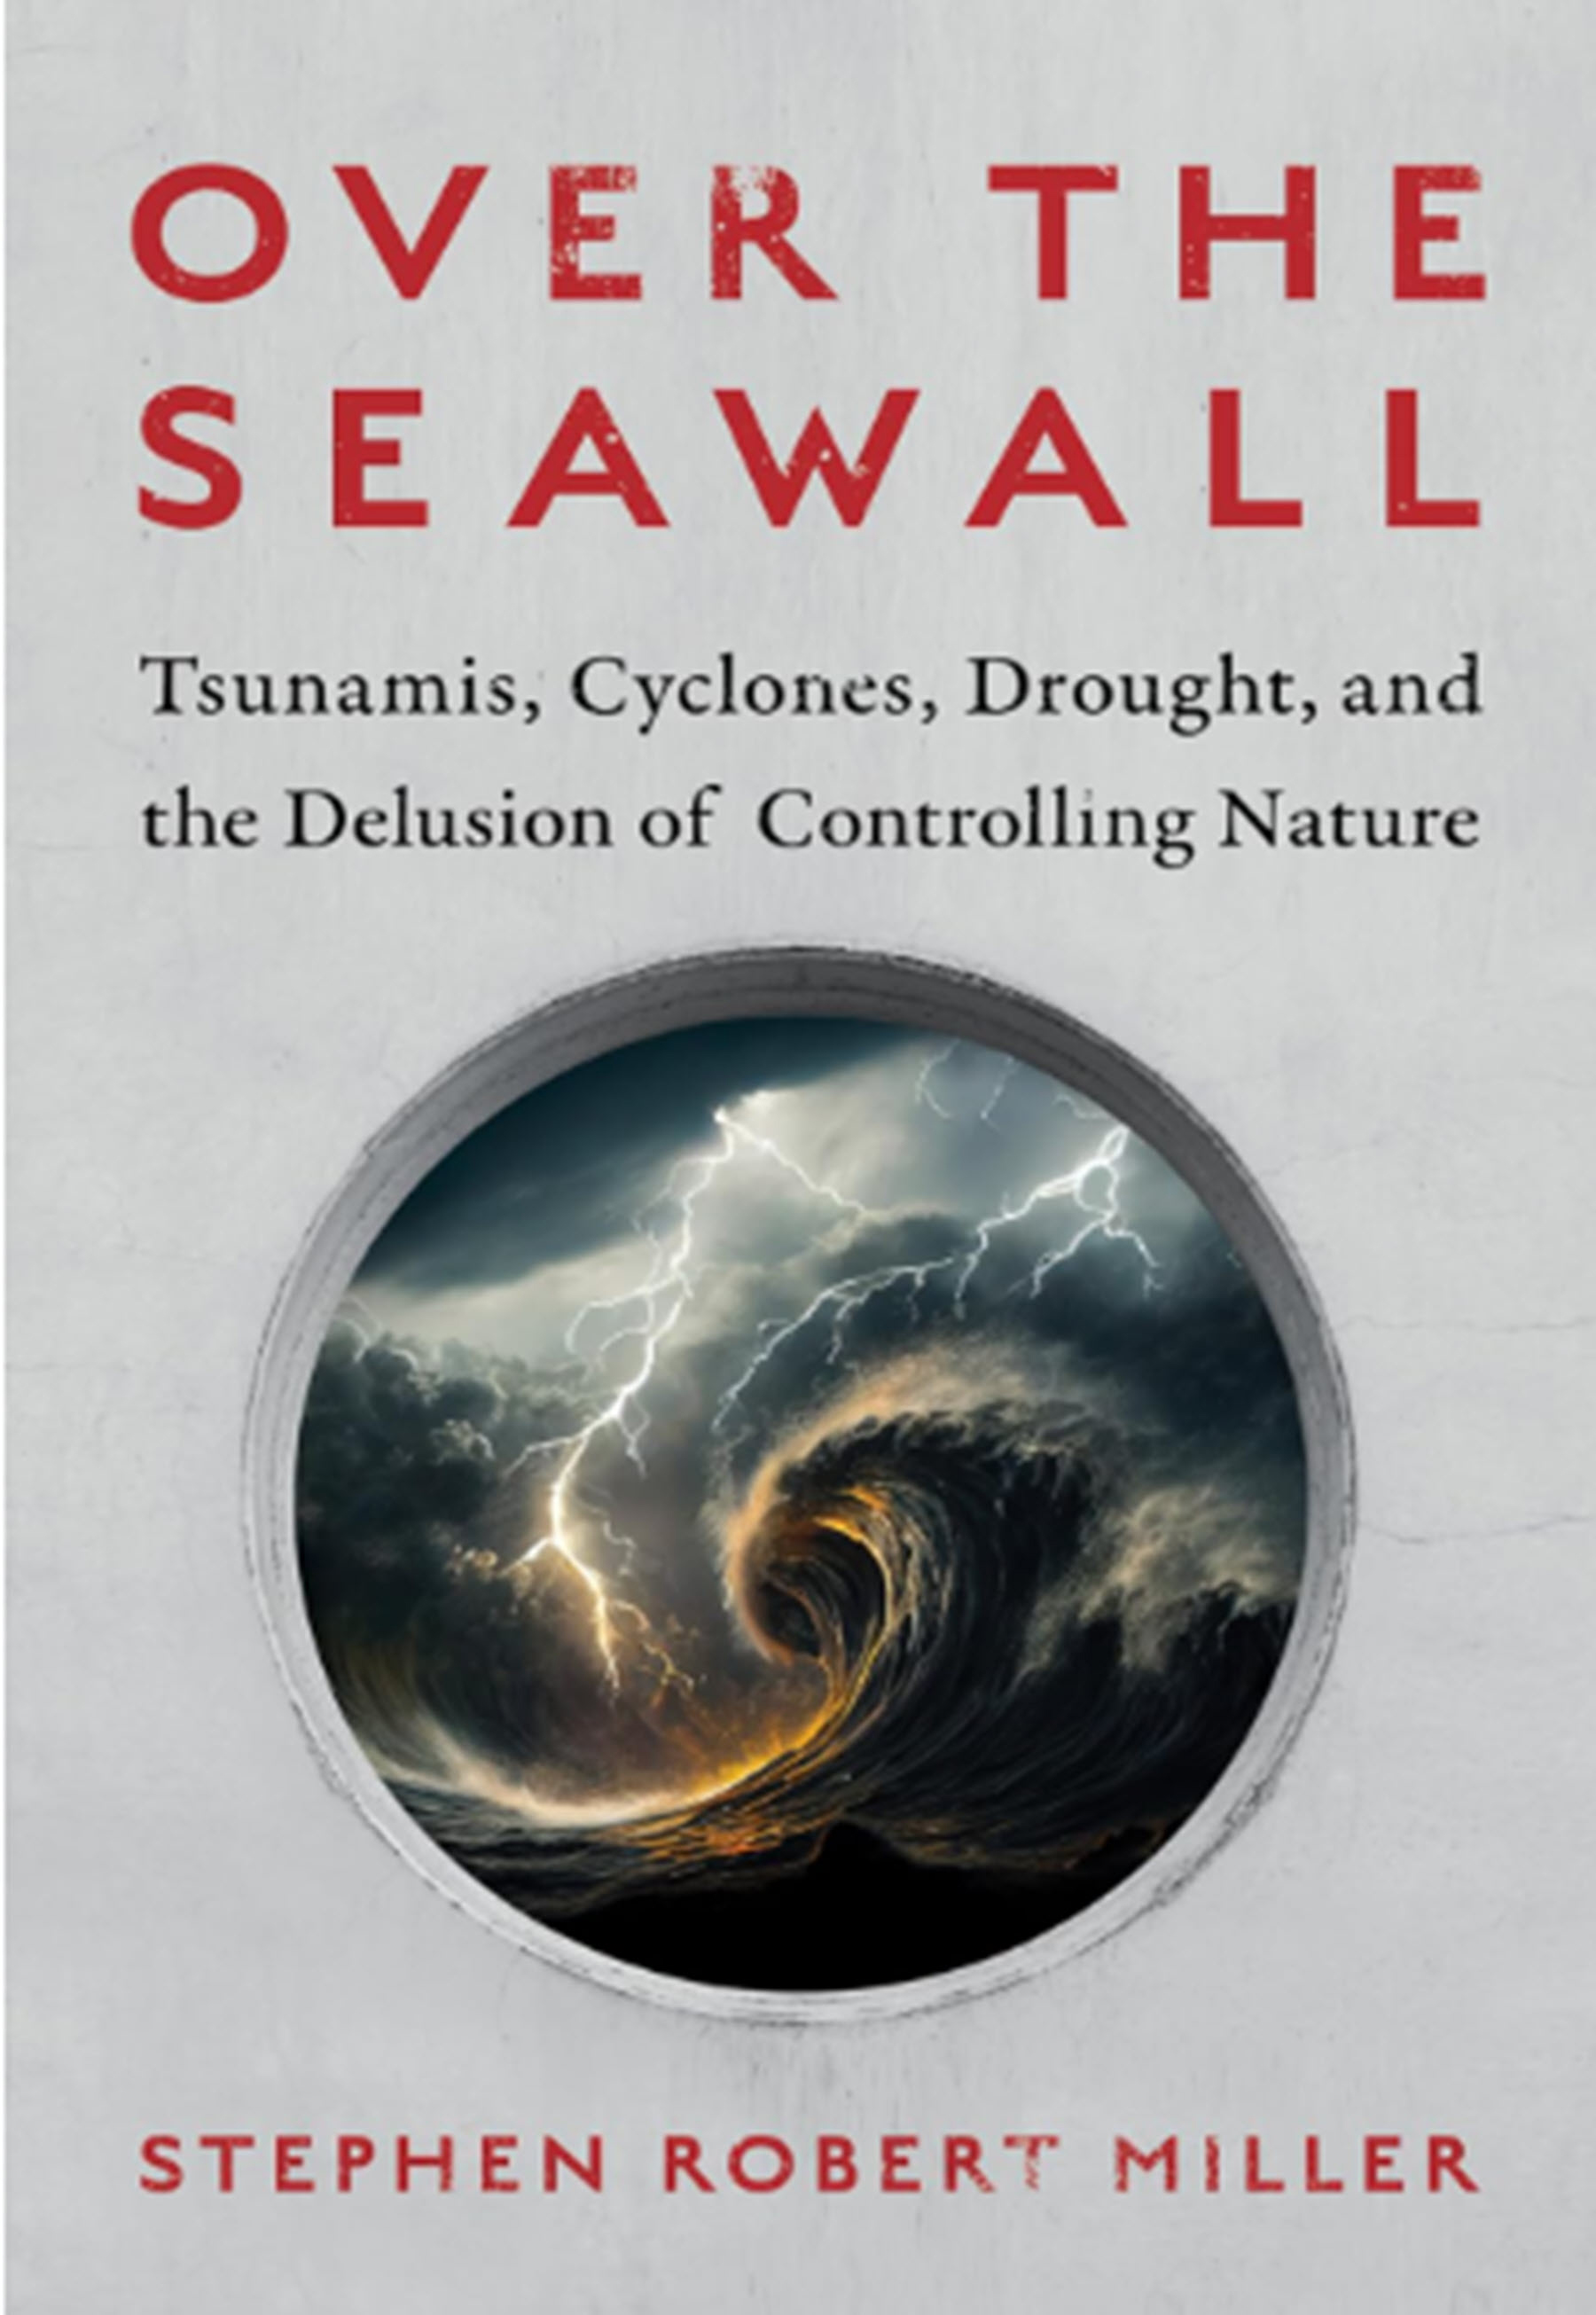 book cover image depicting title and an image with natural disasters